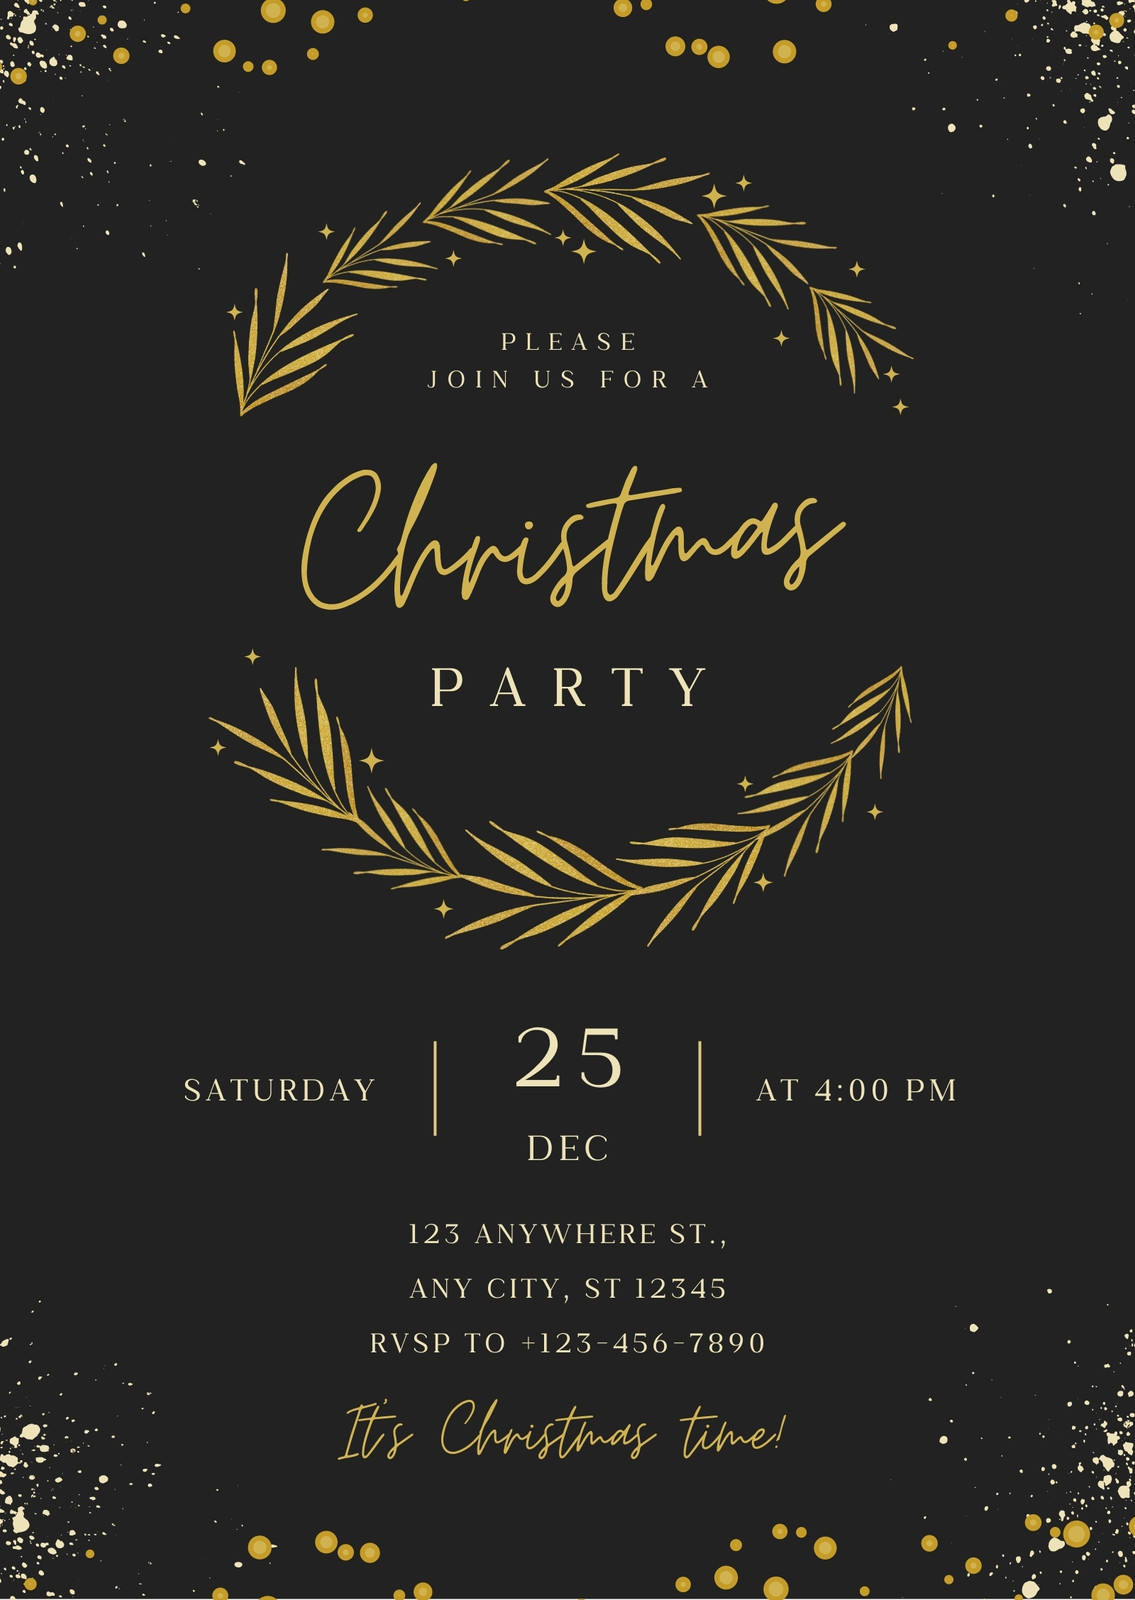 Black and Gold Luxury Card Christmas Party Invitation